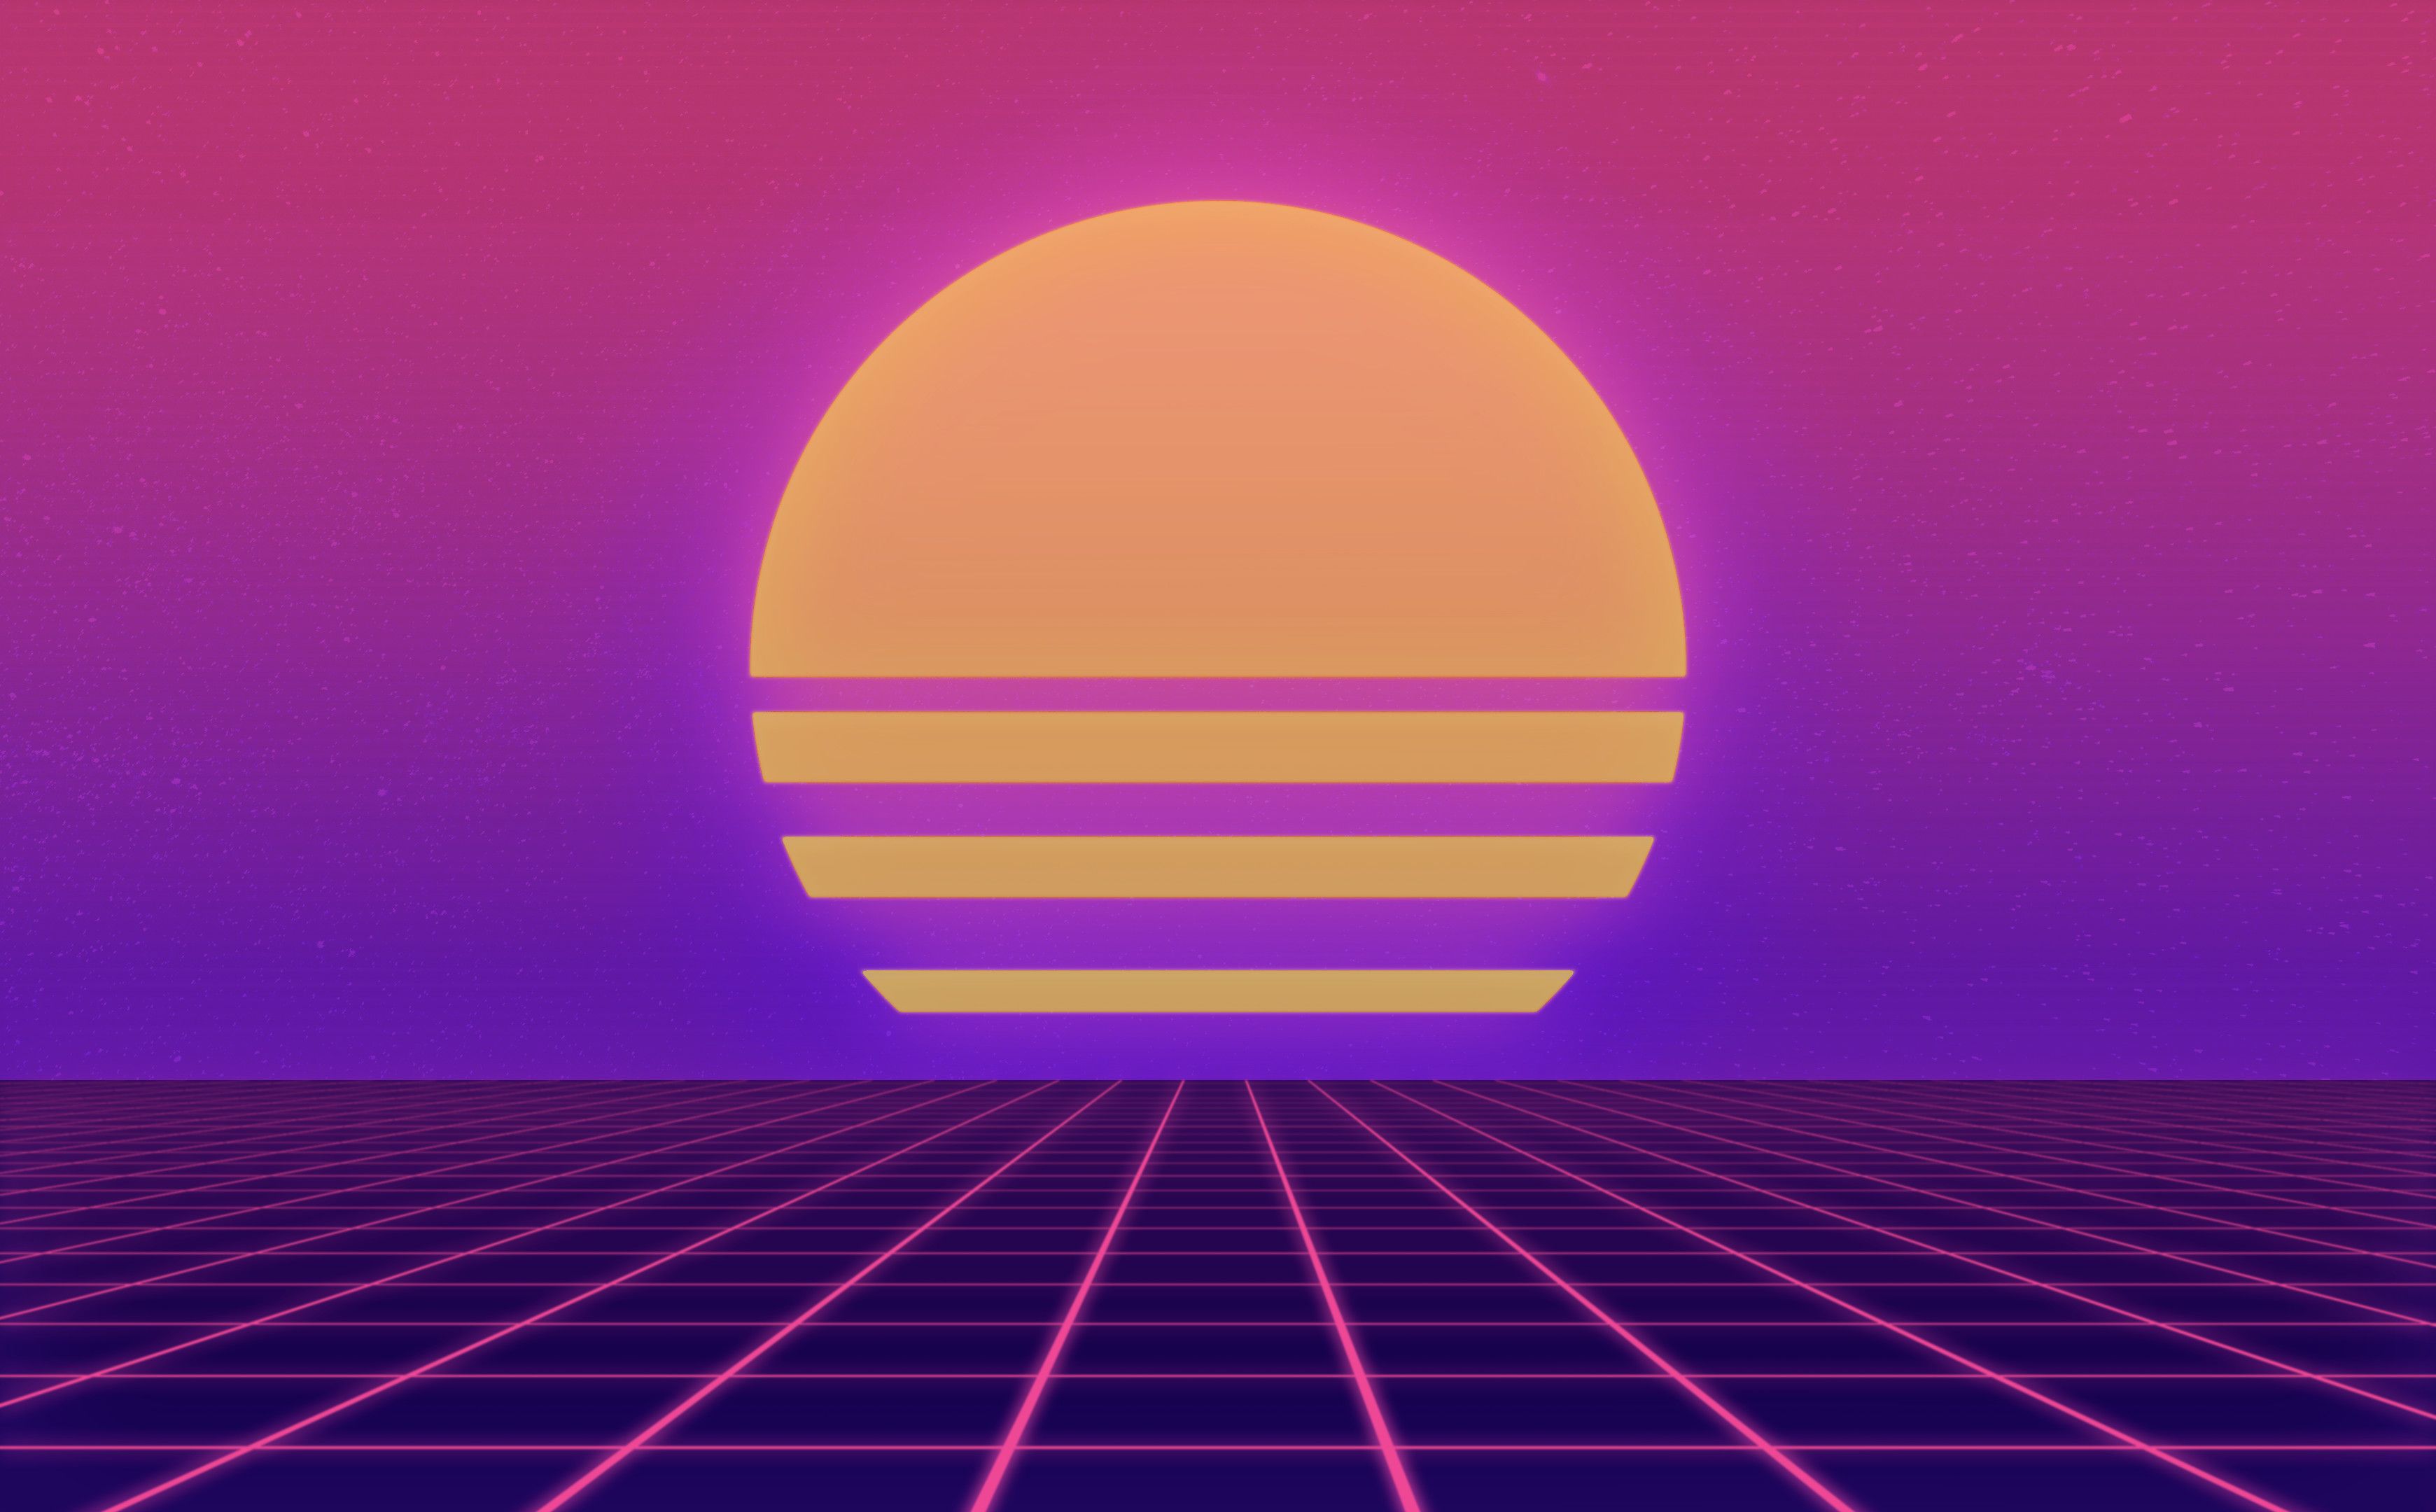 Retro Sunset Aesthetic Wallpapers - Wallpaper Cave